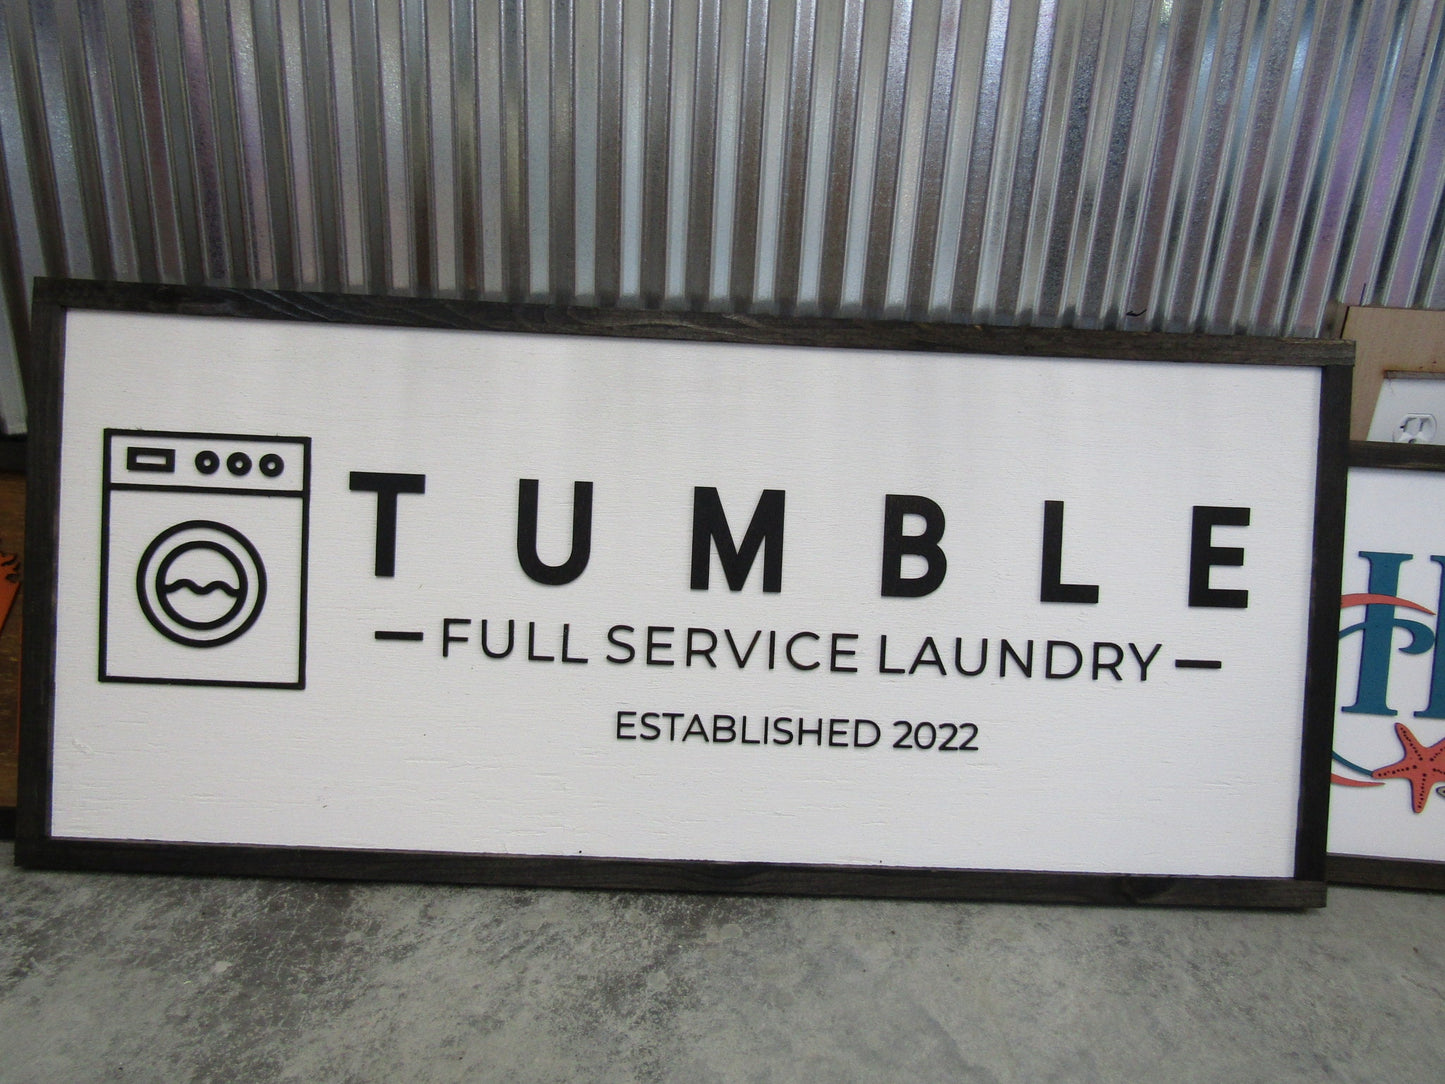 Laundromat Laundry Wash And Dry Full Service Commerical Signage Business Professional Wooden Raised Letters Oversized Sign Handmade Custom